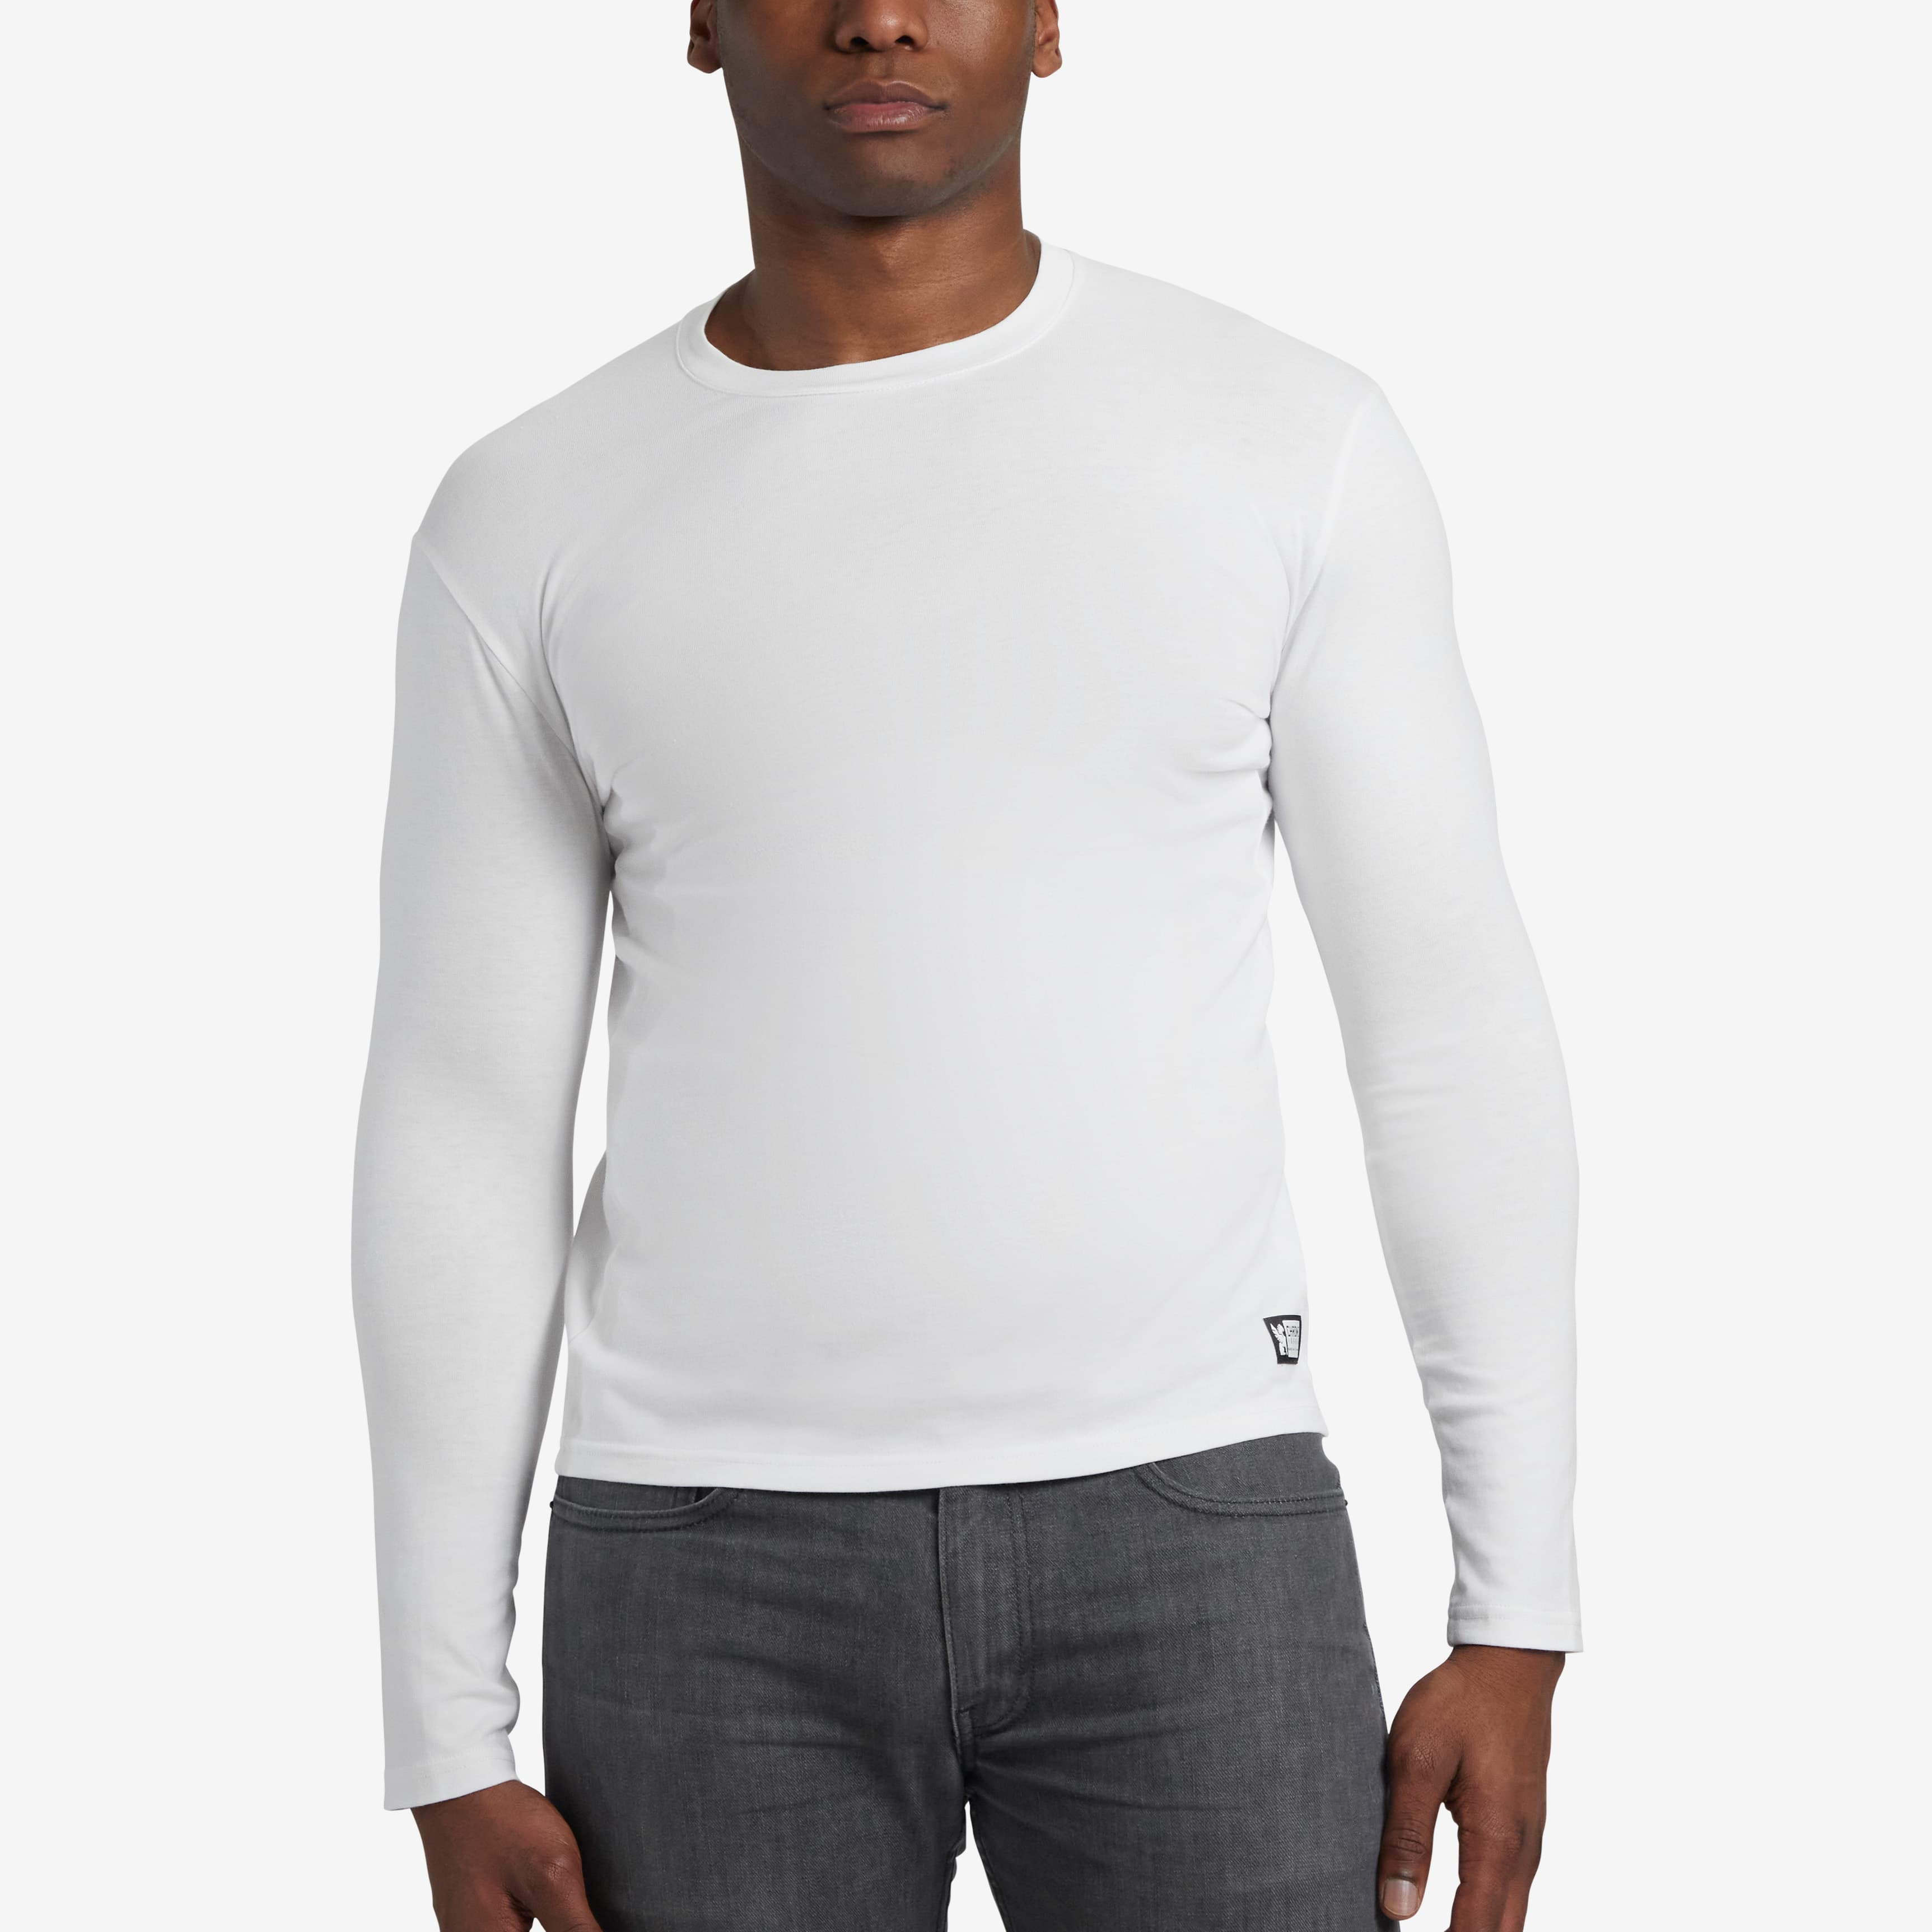 Chrome Issued Long Sleeve Tee Men's Fit